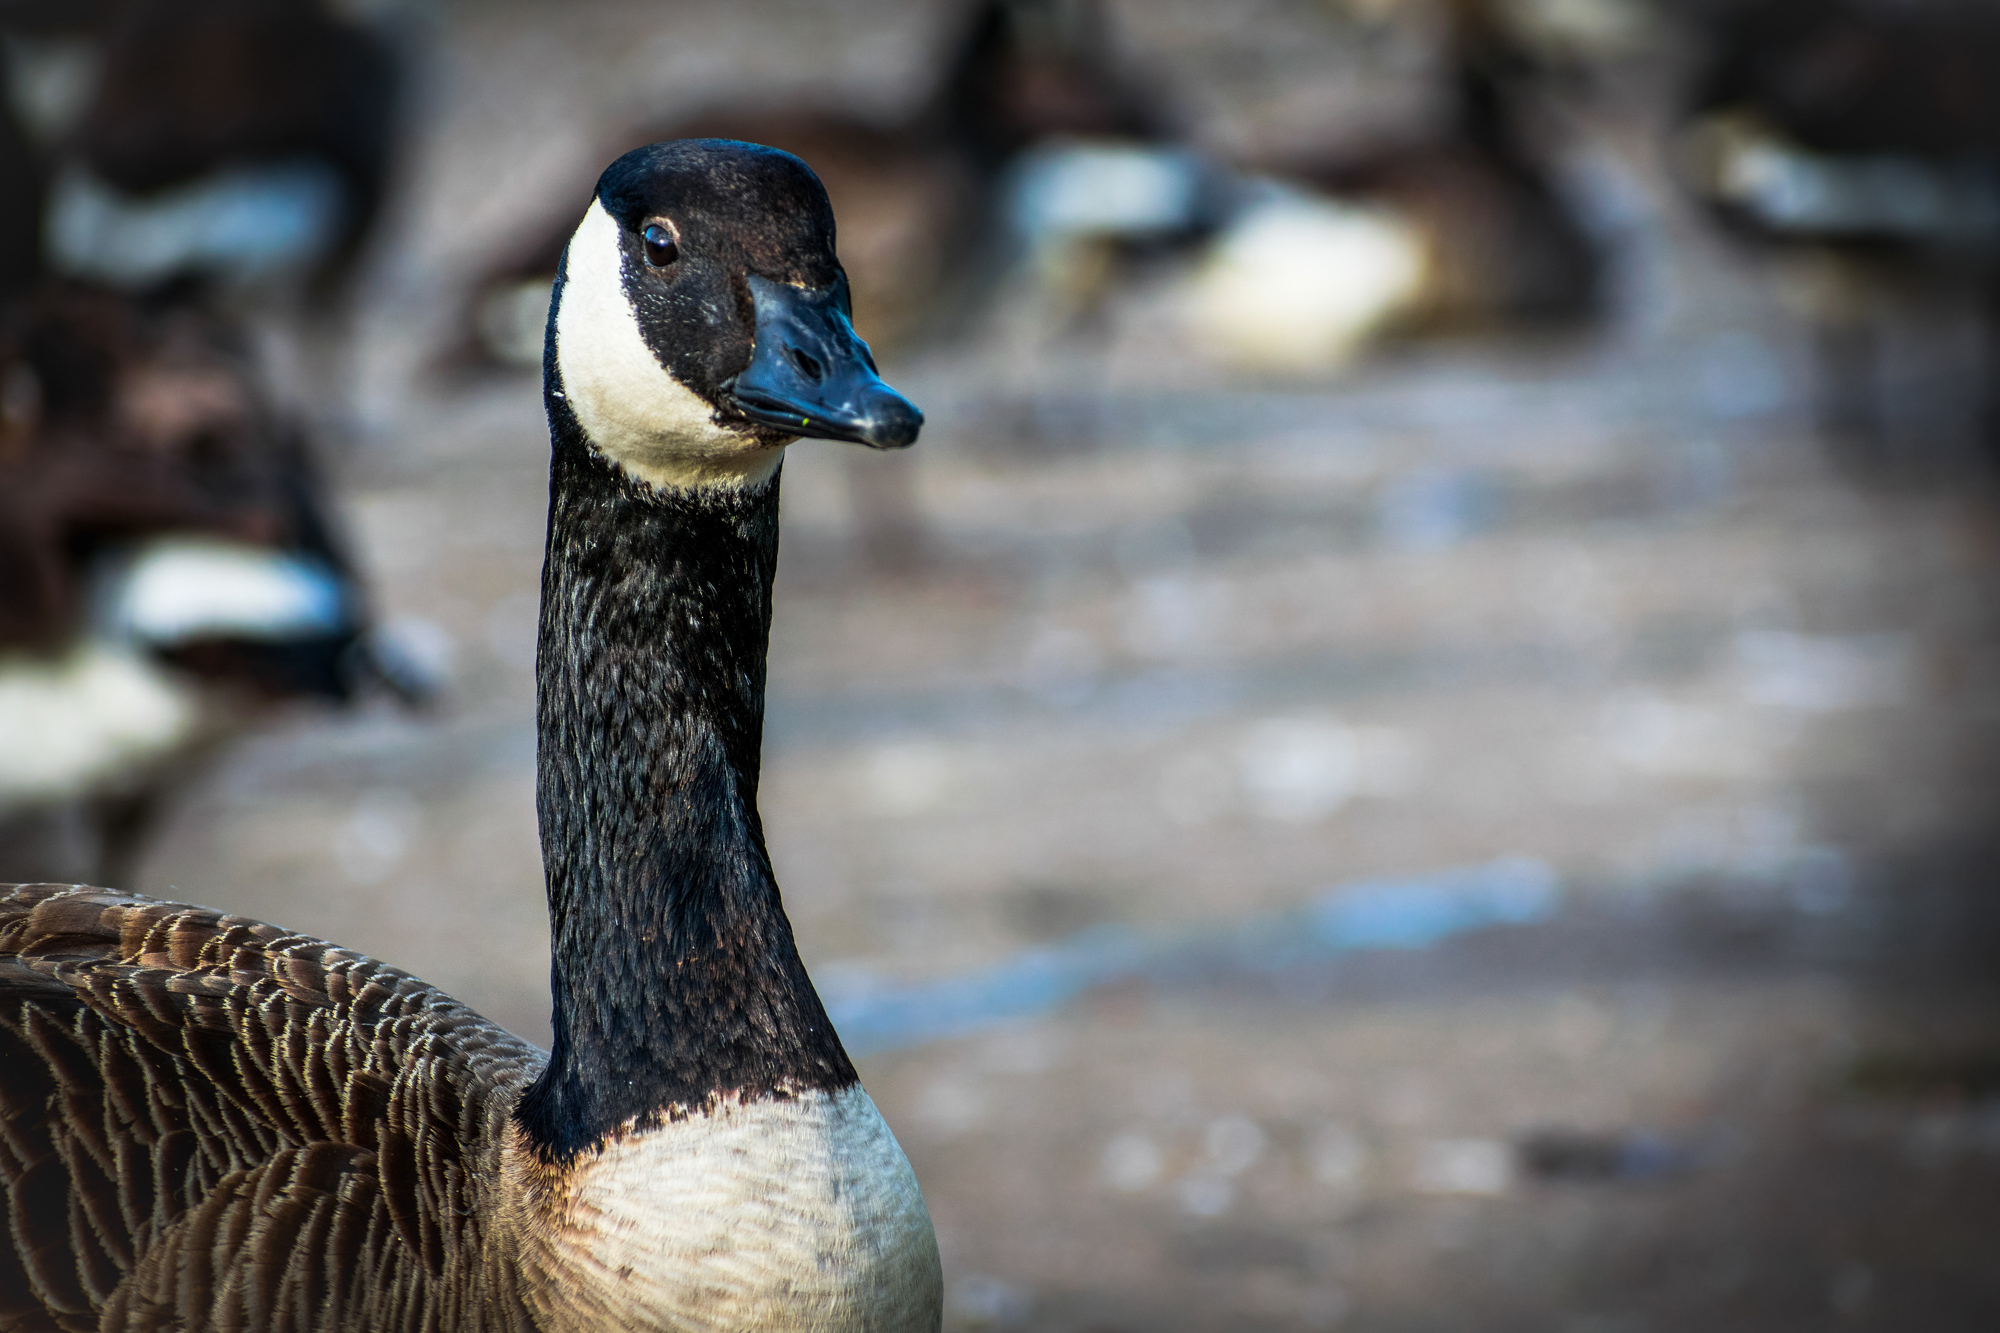 What a Really Mad Goose Taught Me About Overcoming Fear in My Business